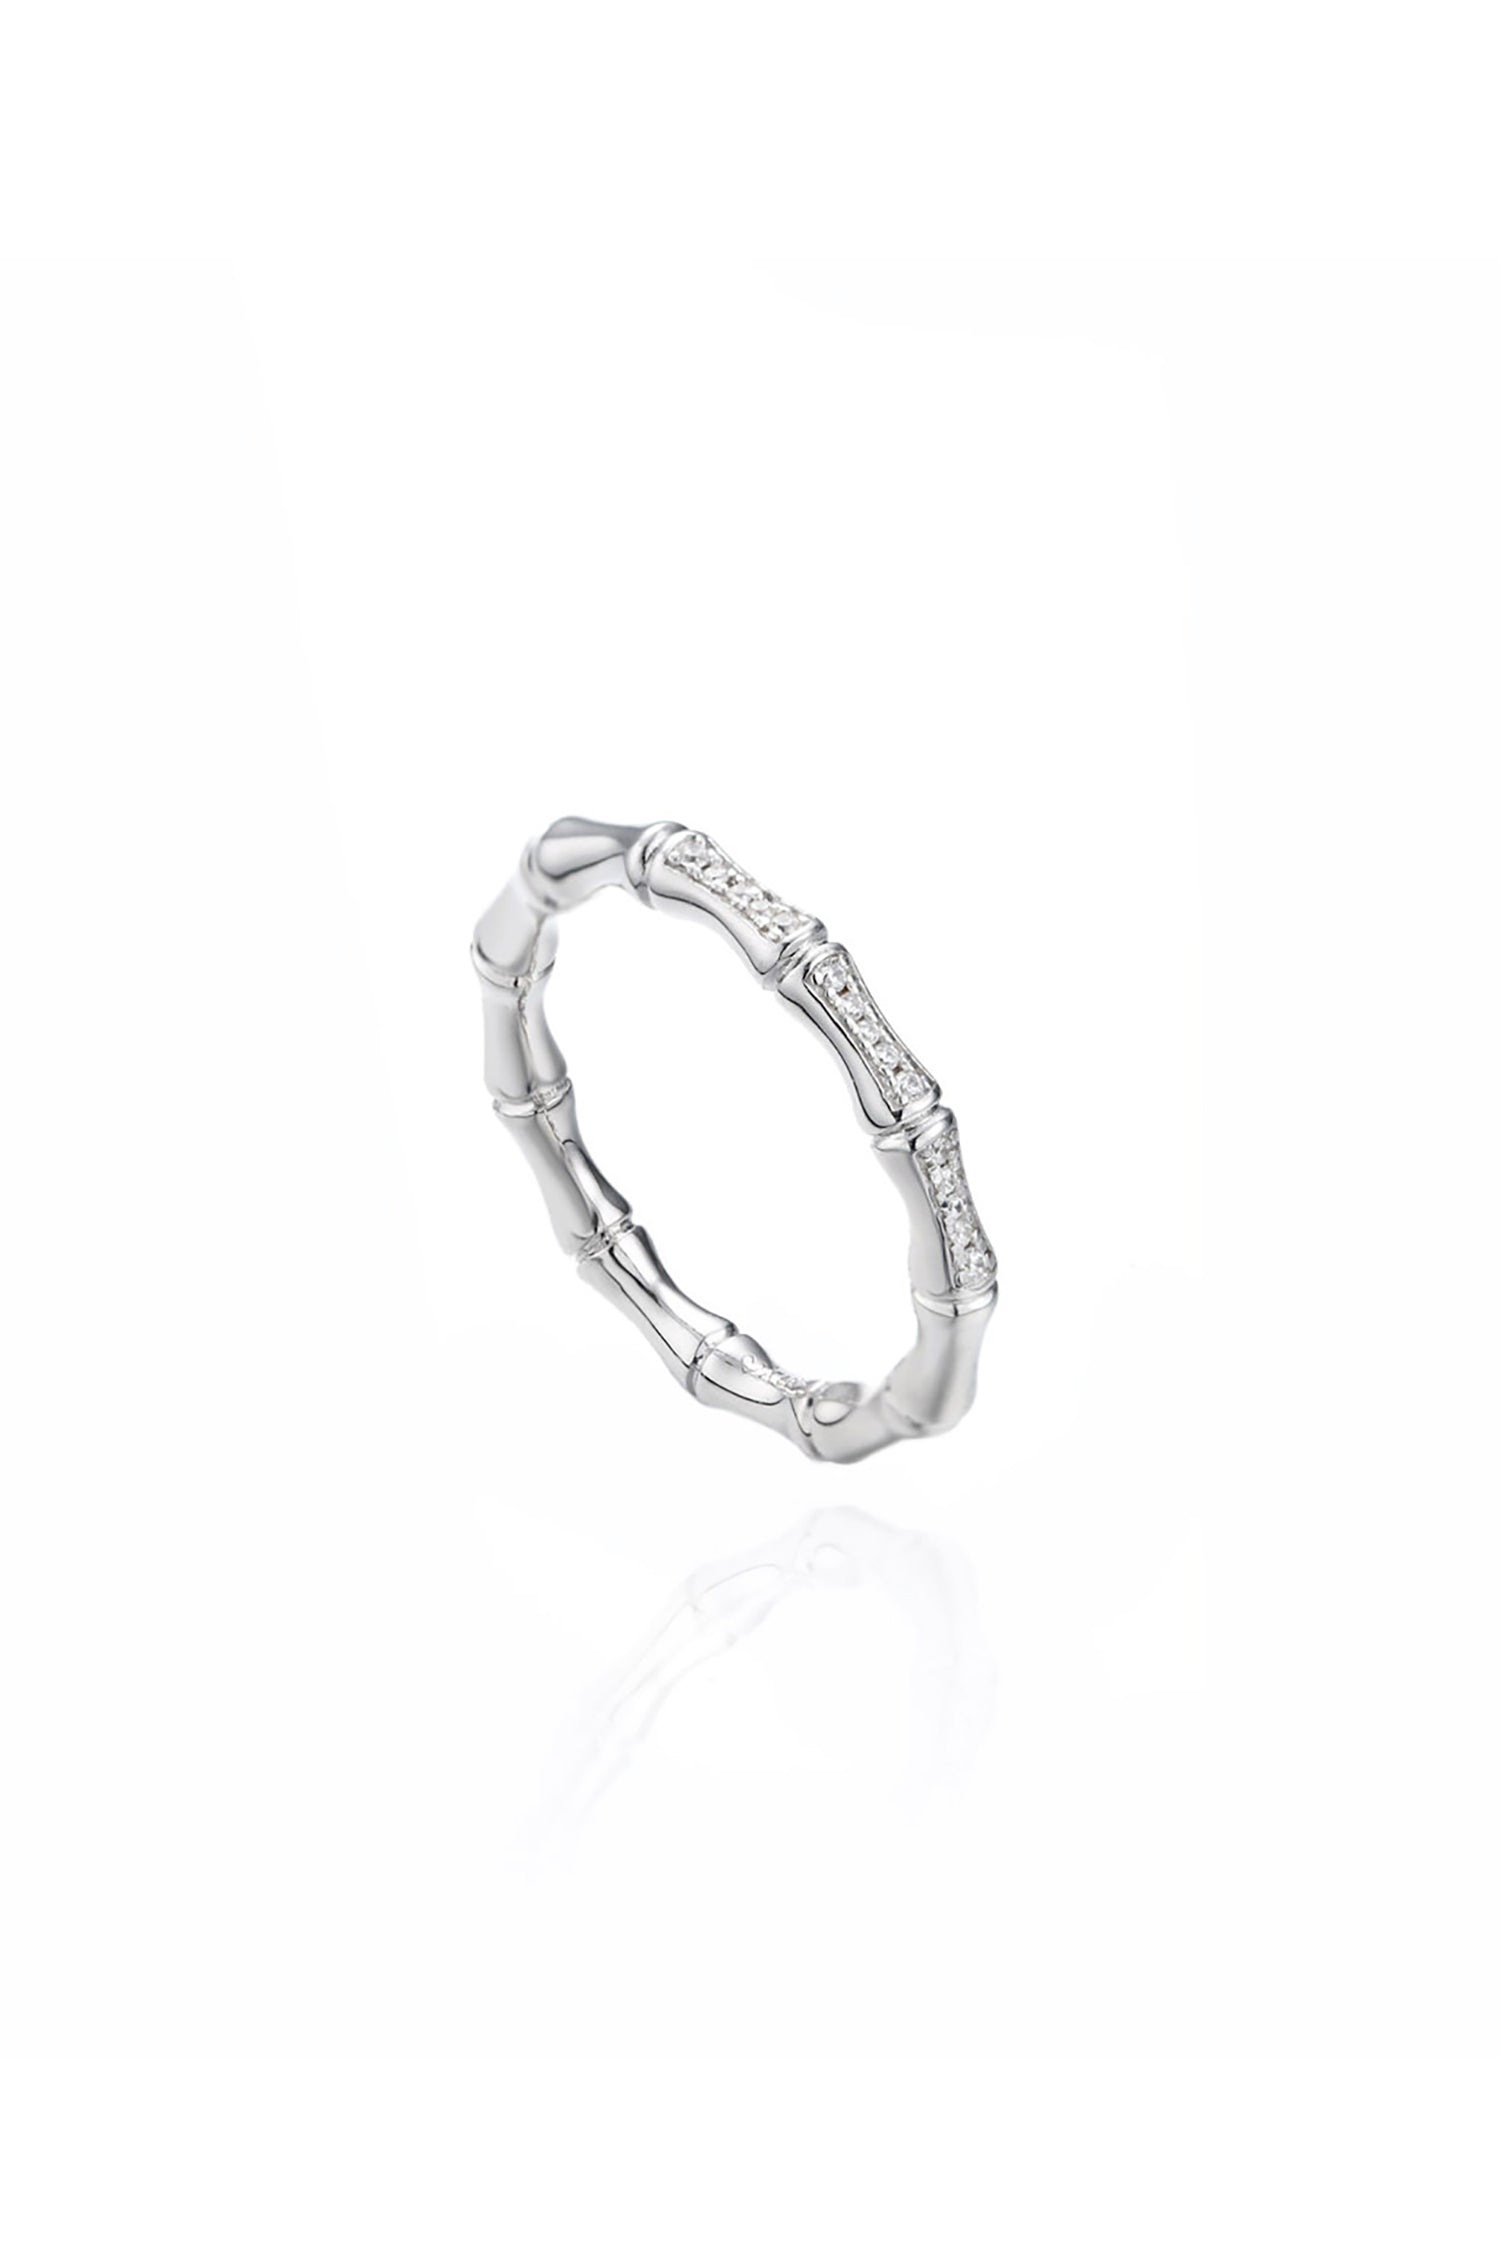  Bamboo Ring Sterling Silver  White Background